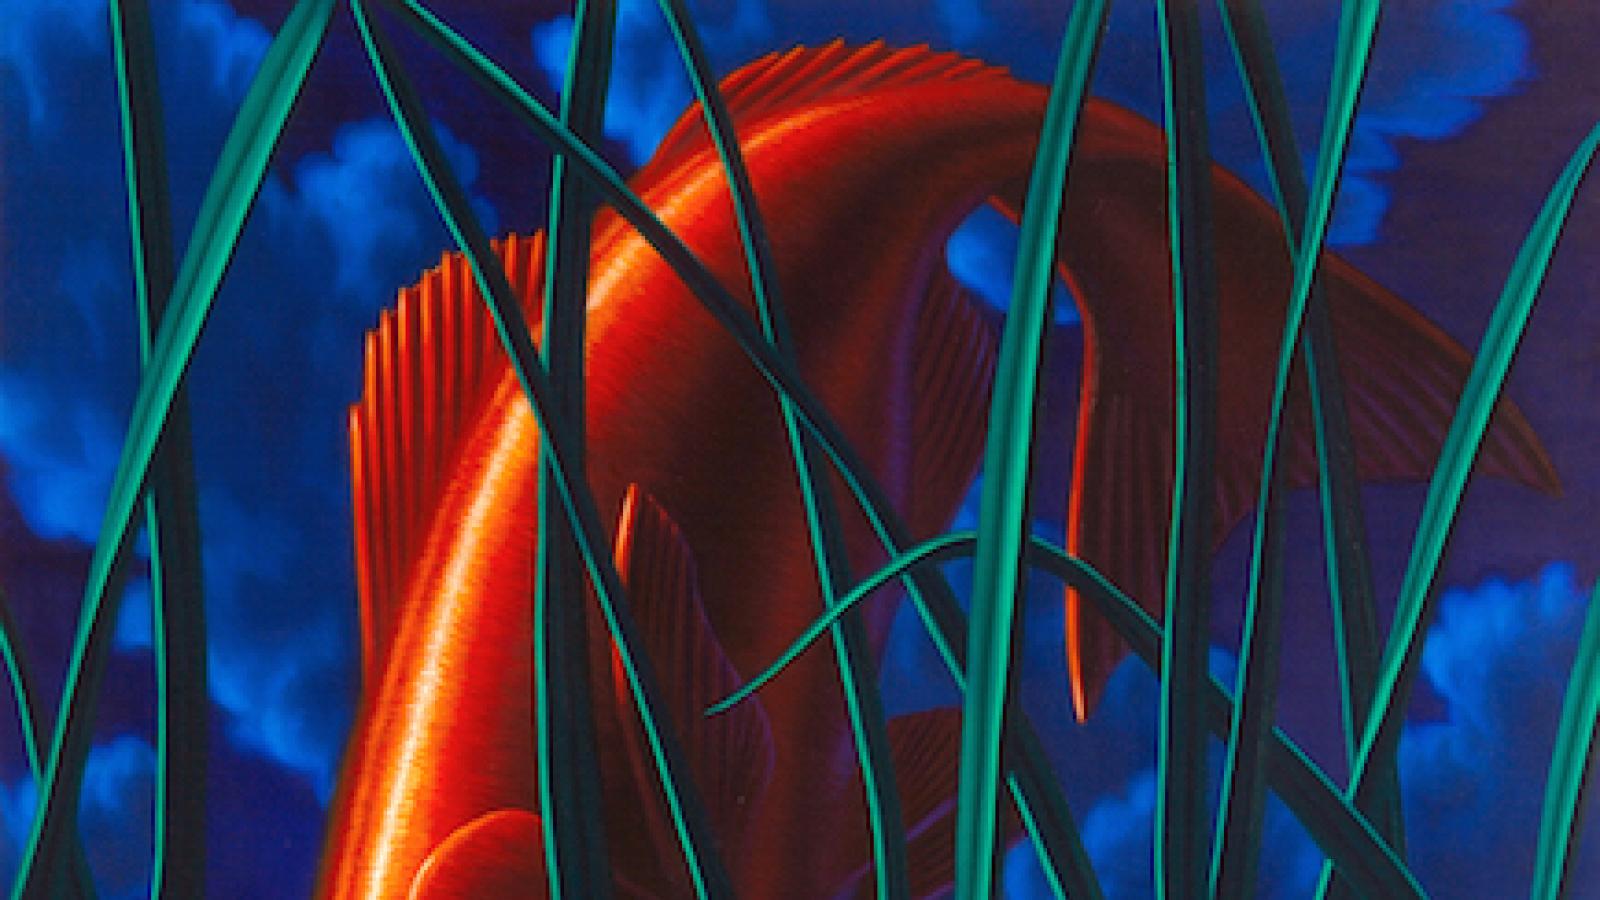 painting of a red fish positioned vertically over a body of water so you also see its reflection